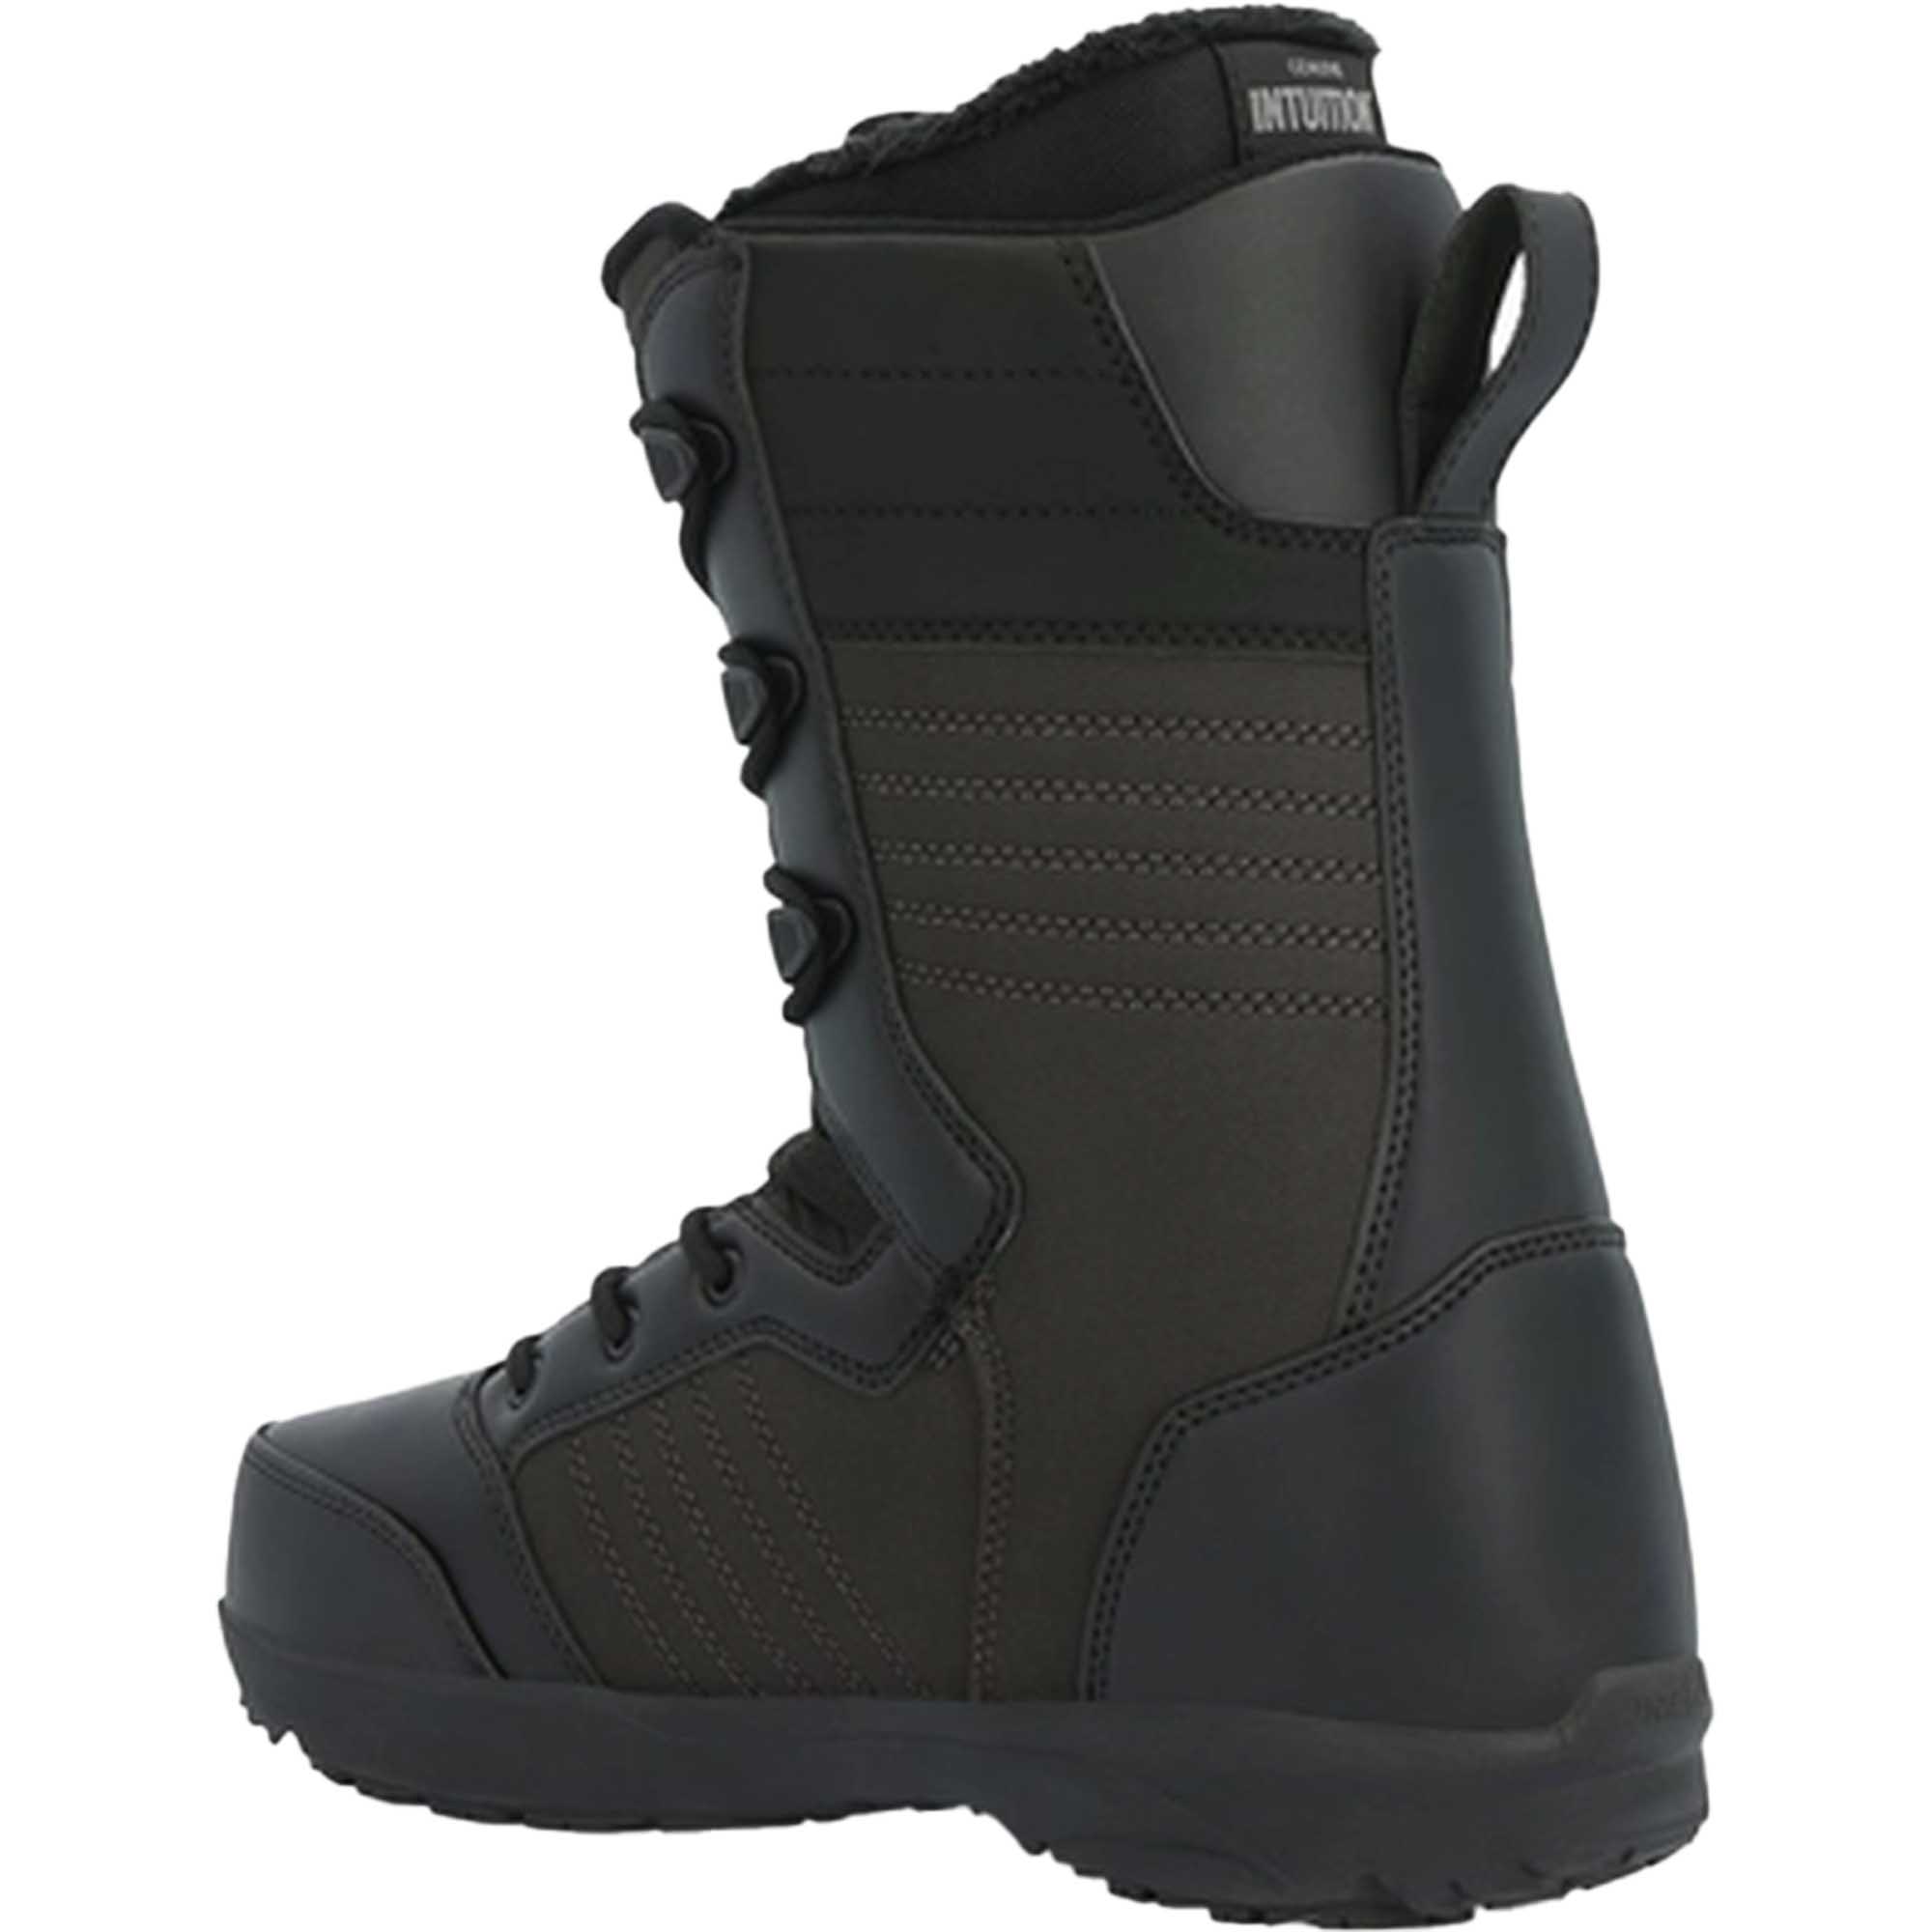 Ride Stock Snowboard Boots